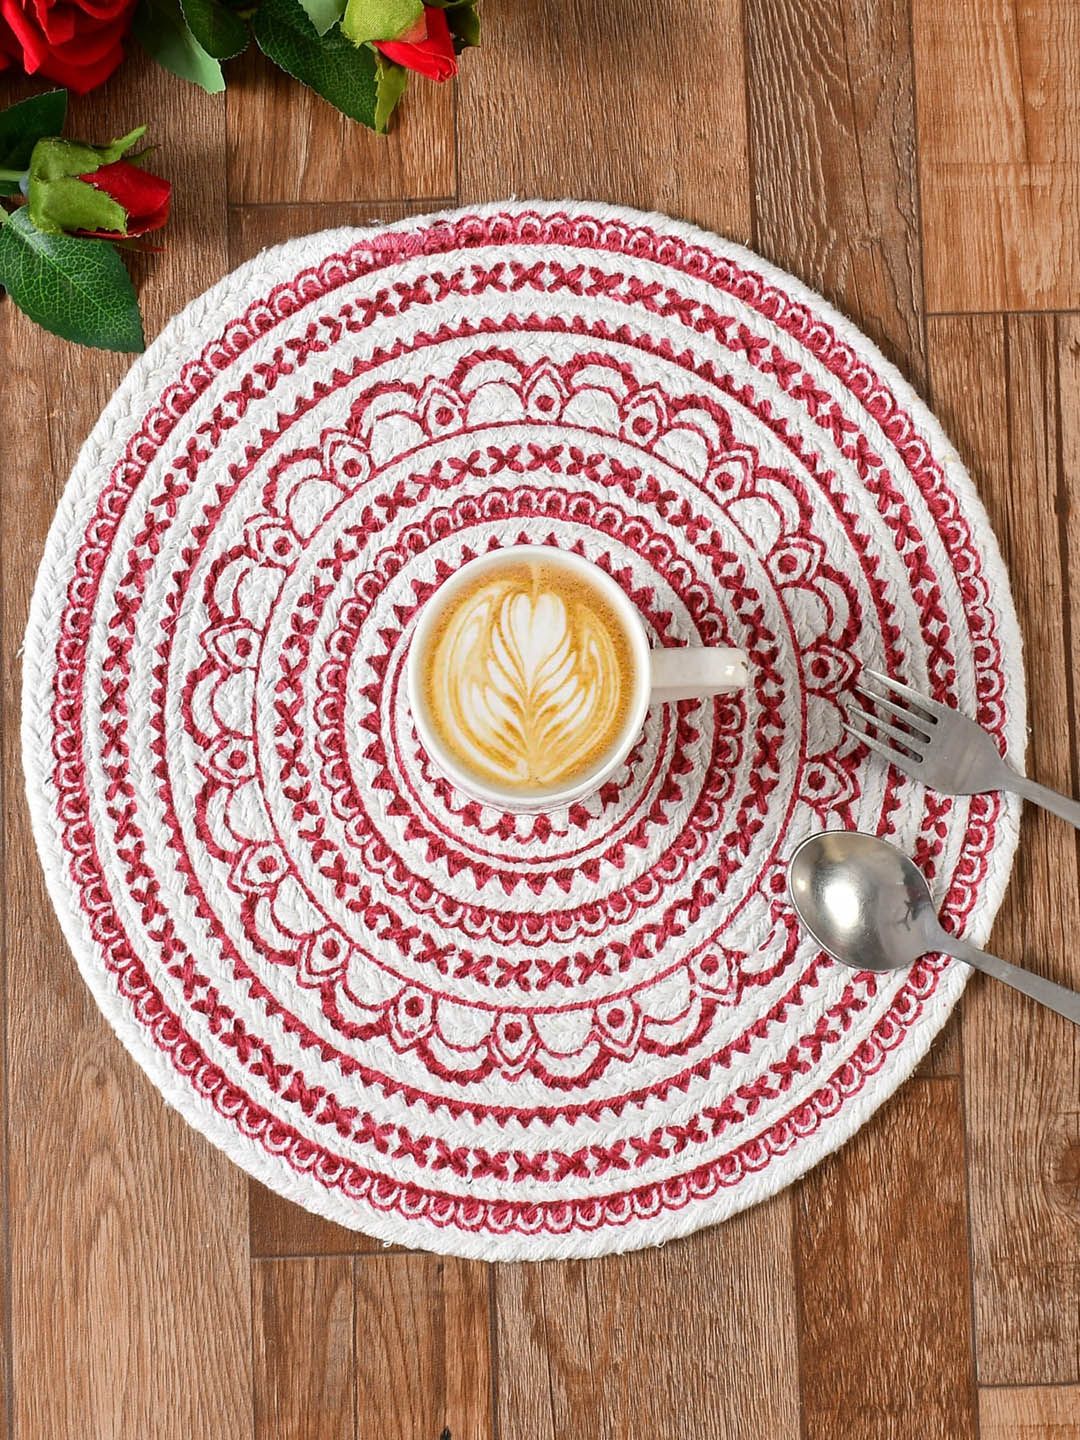 Homefab India Set Of 4 Printed Cotton Table Placemats Price in India